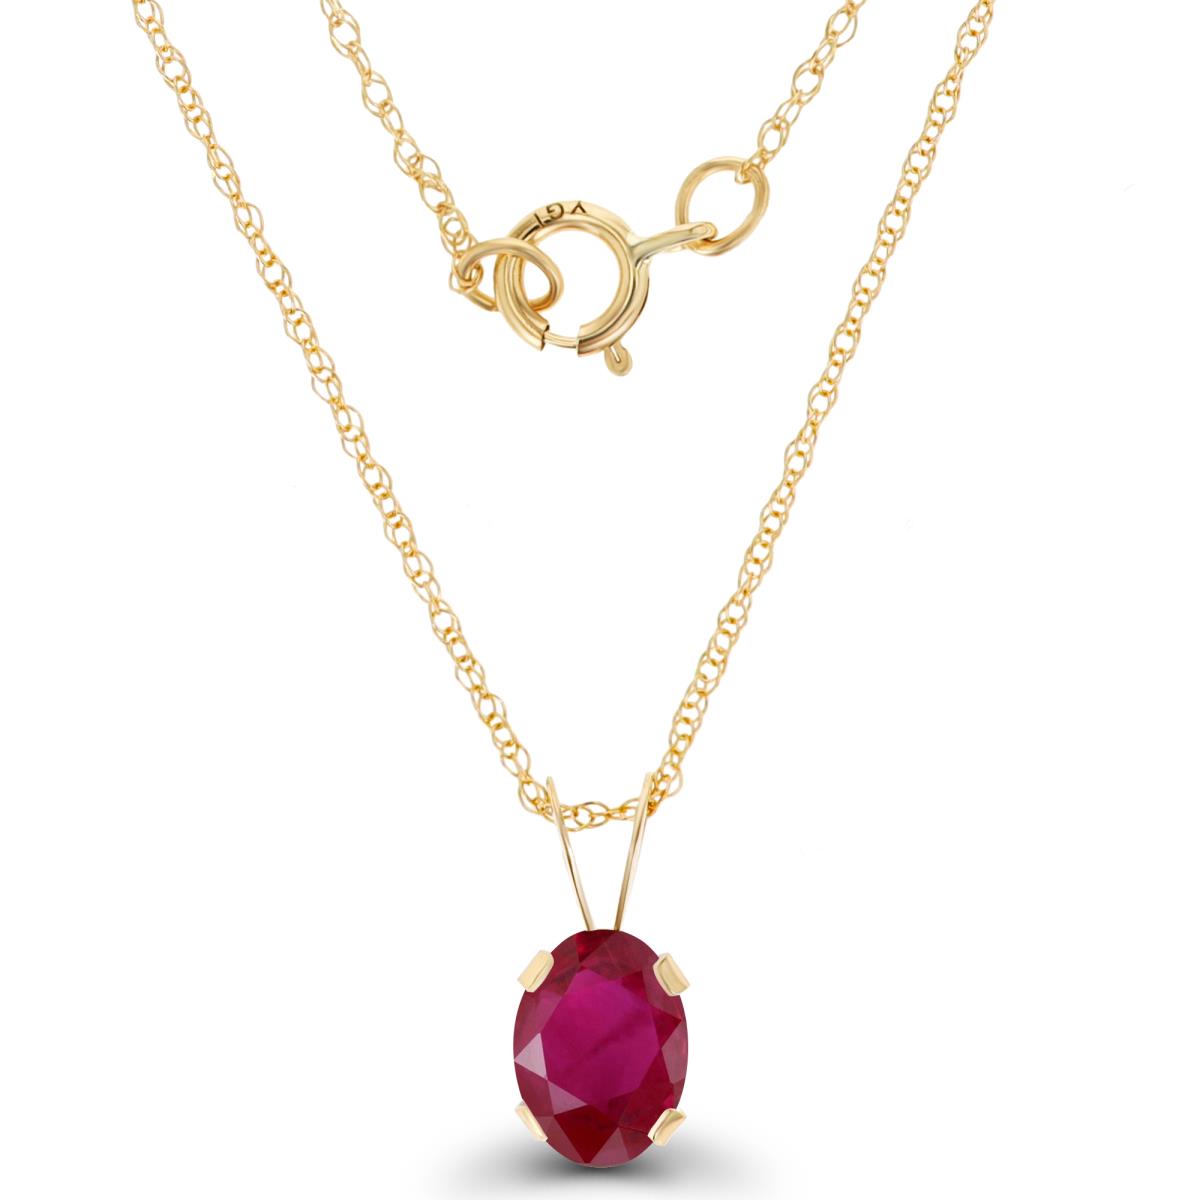 14K Yellow Gold 7x5mm Oval Glass Filled Ruby 18" Rope Chain Necklace